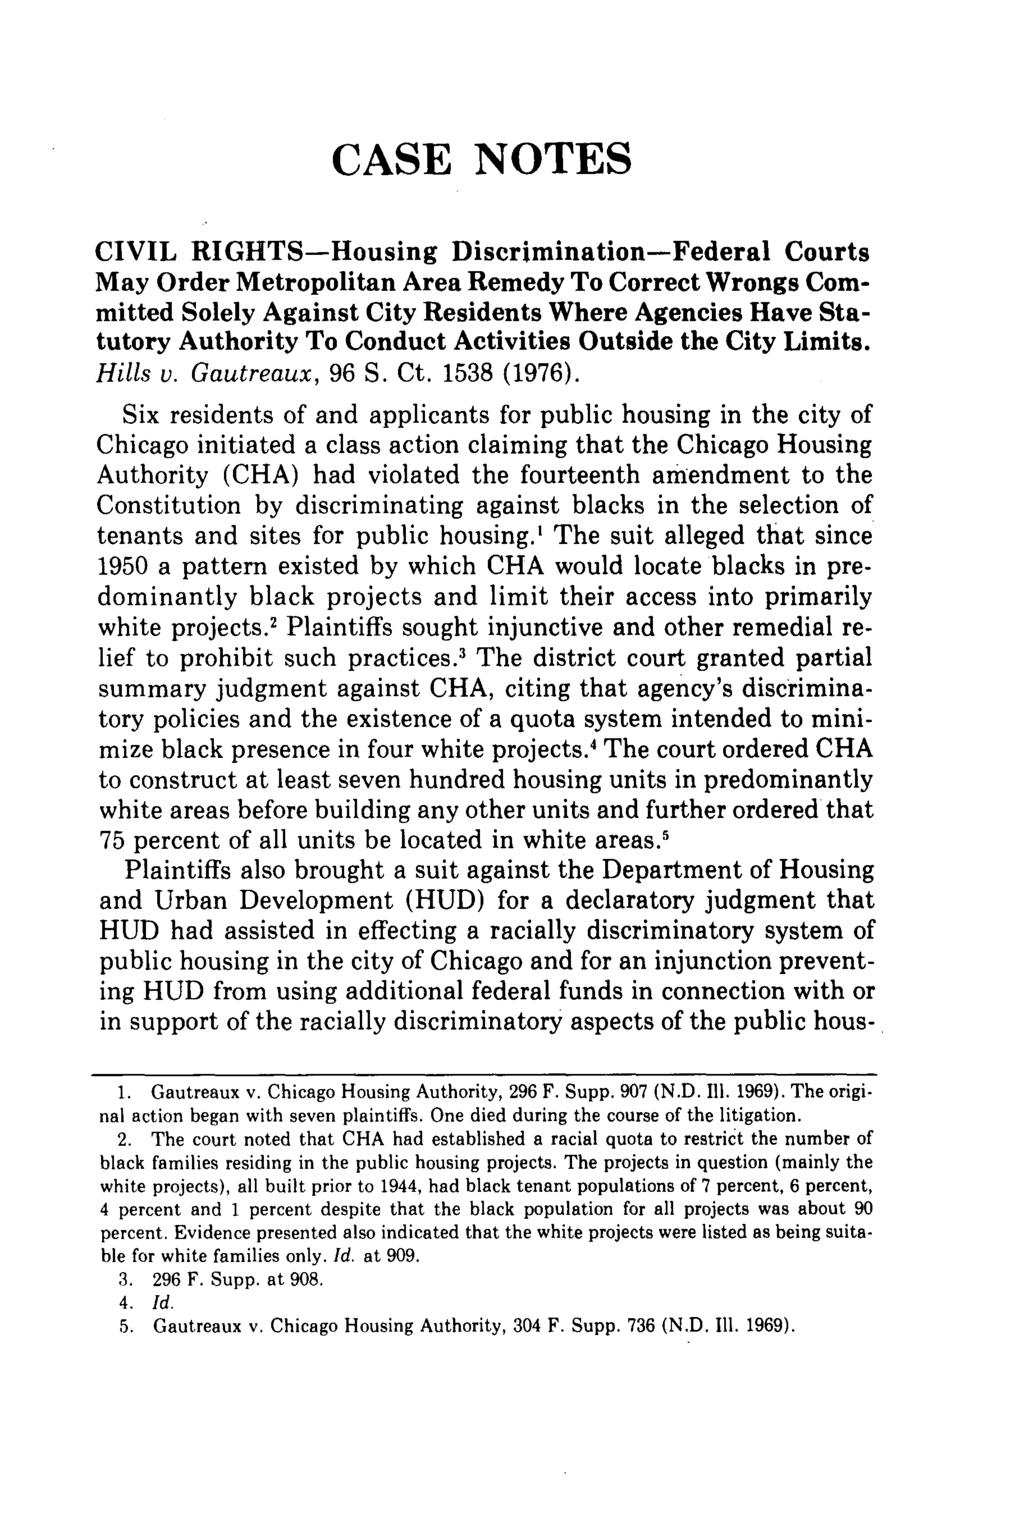 CASE NOTES CIVIL RIGHTS-Housing Discrimination-Federal Courts May Order Metropolitan Area Remedy To Correct Wrongs Committed Solely Against City Residents Where Agencies Have Statutory Authority To